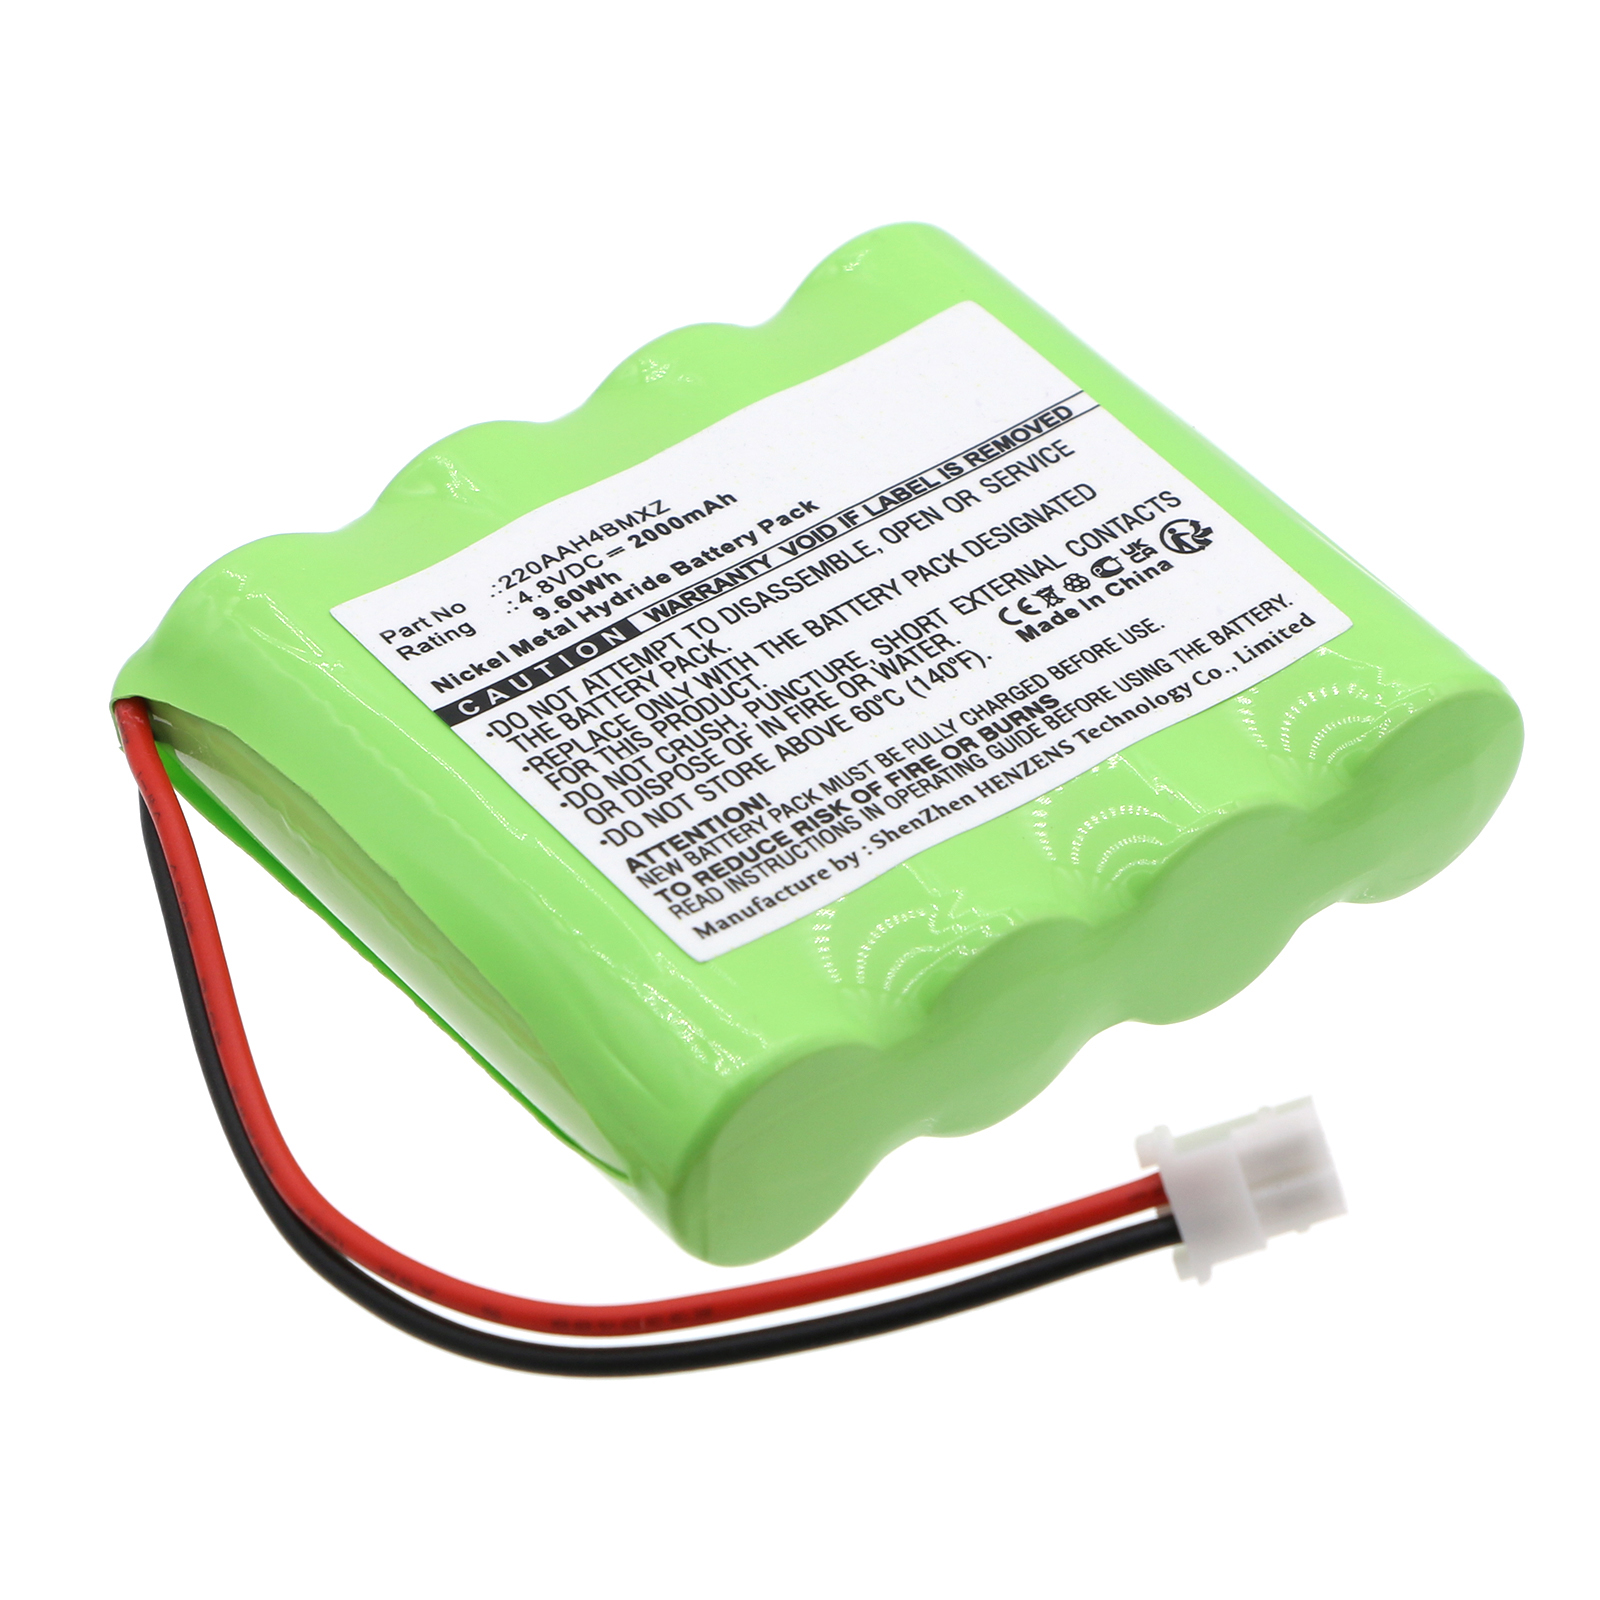 Synergy Digital Medical Battery, Compatible with I-Tech 11205-C Medical Battery (Ni-MH, 4.8V, 2000mAh)